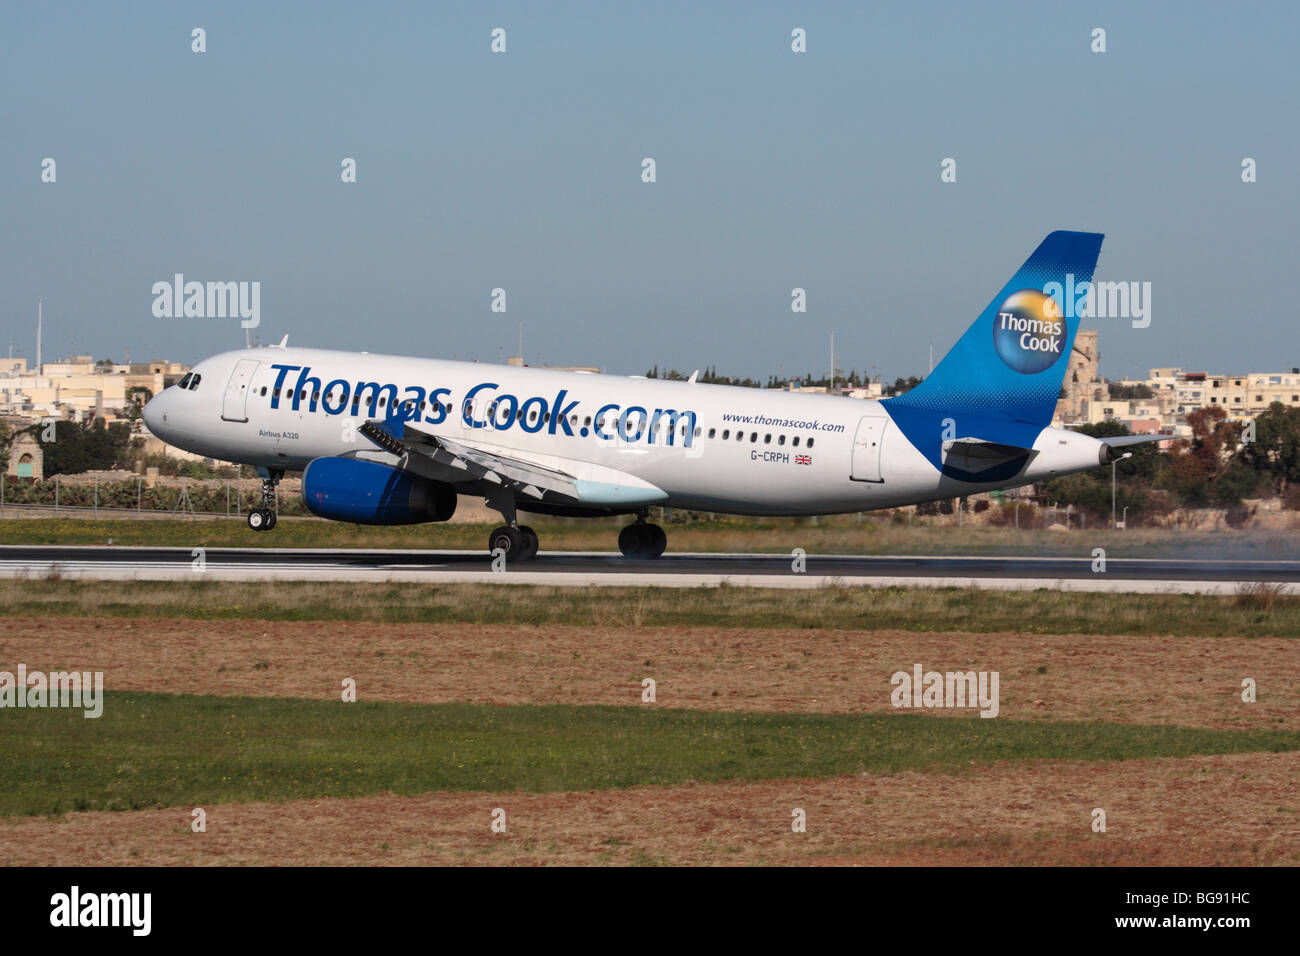 British airlines in the EU. Thomas Cook Airlines Airbus A320 passenger jet plane touching down in Malta Stock Photo